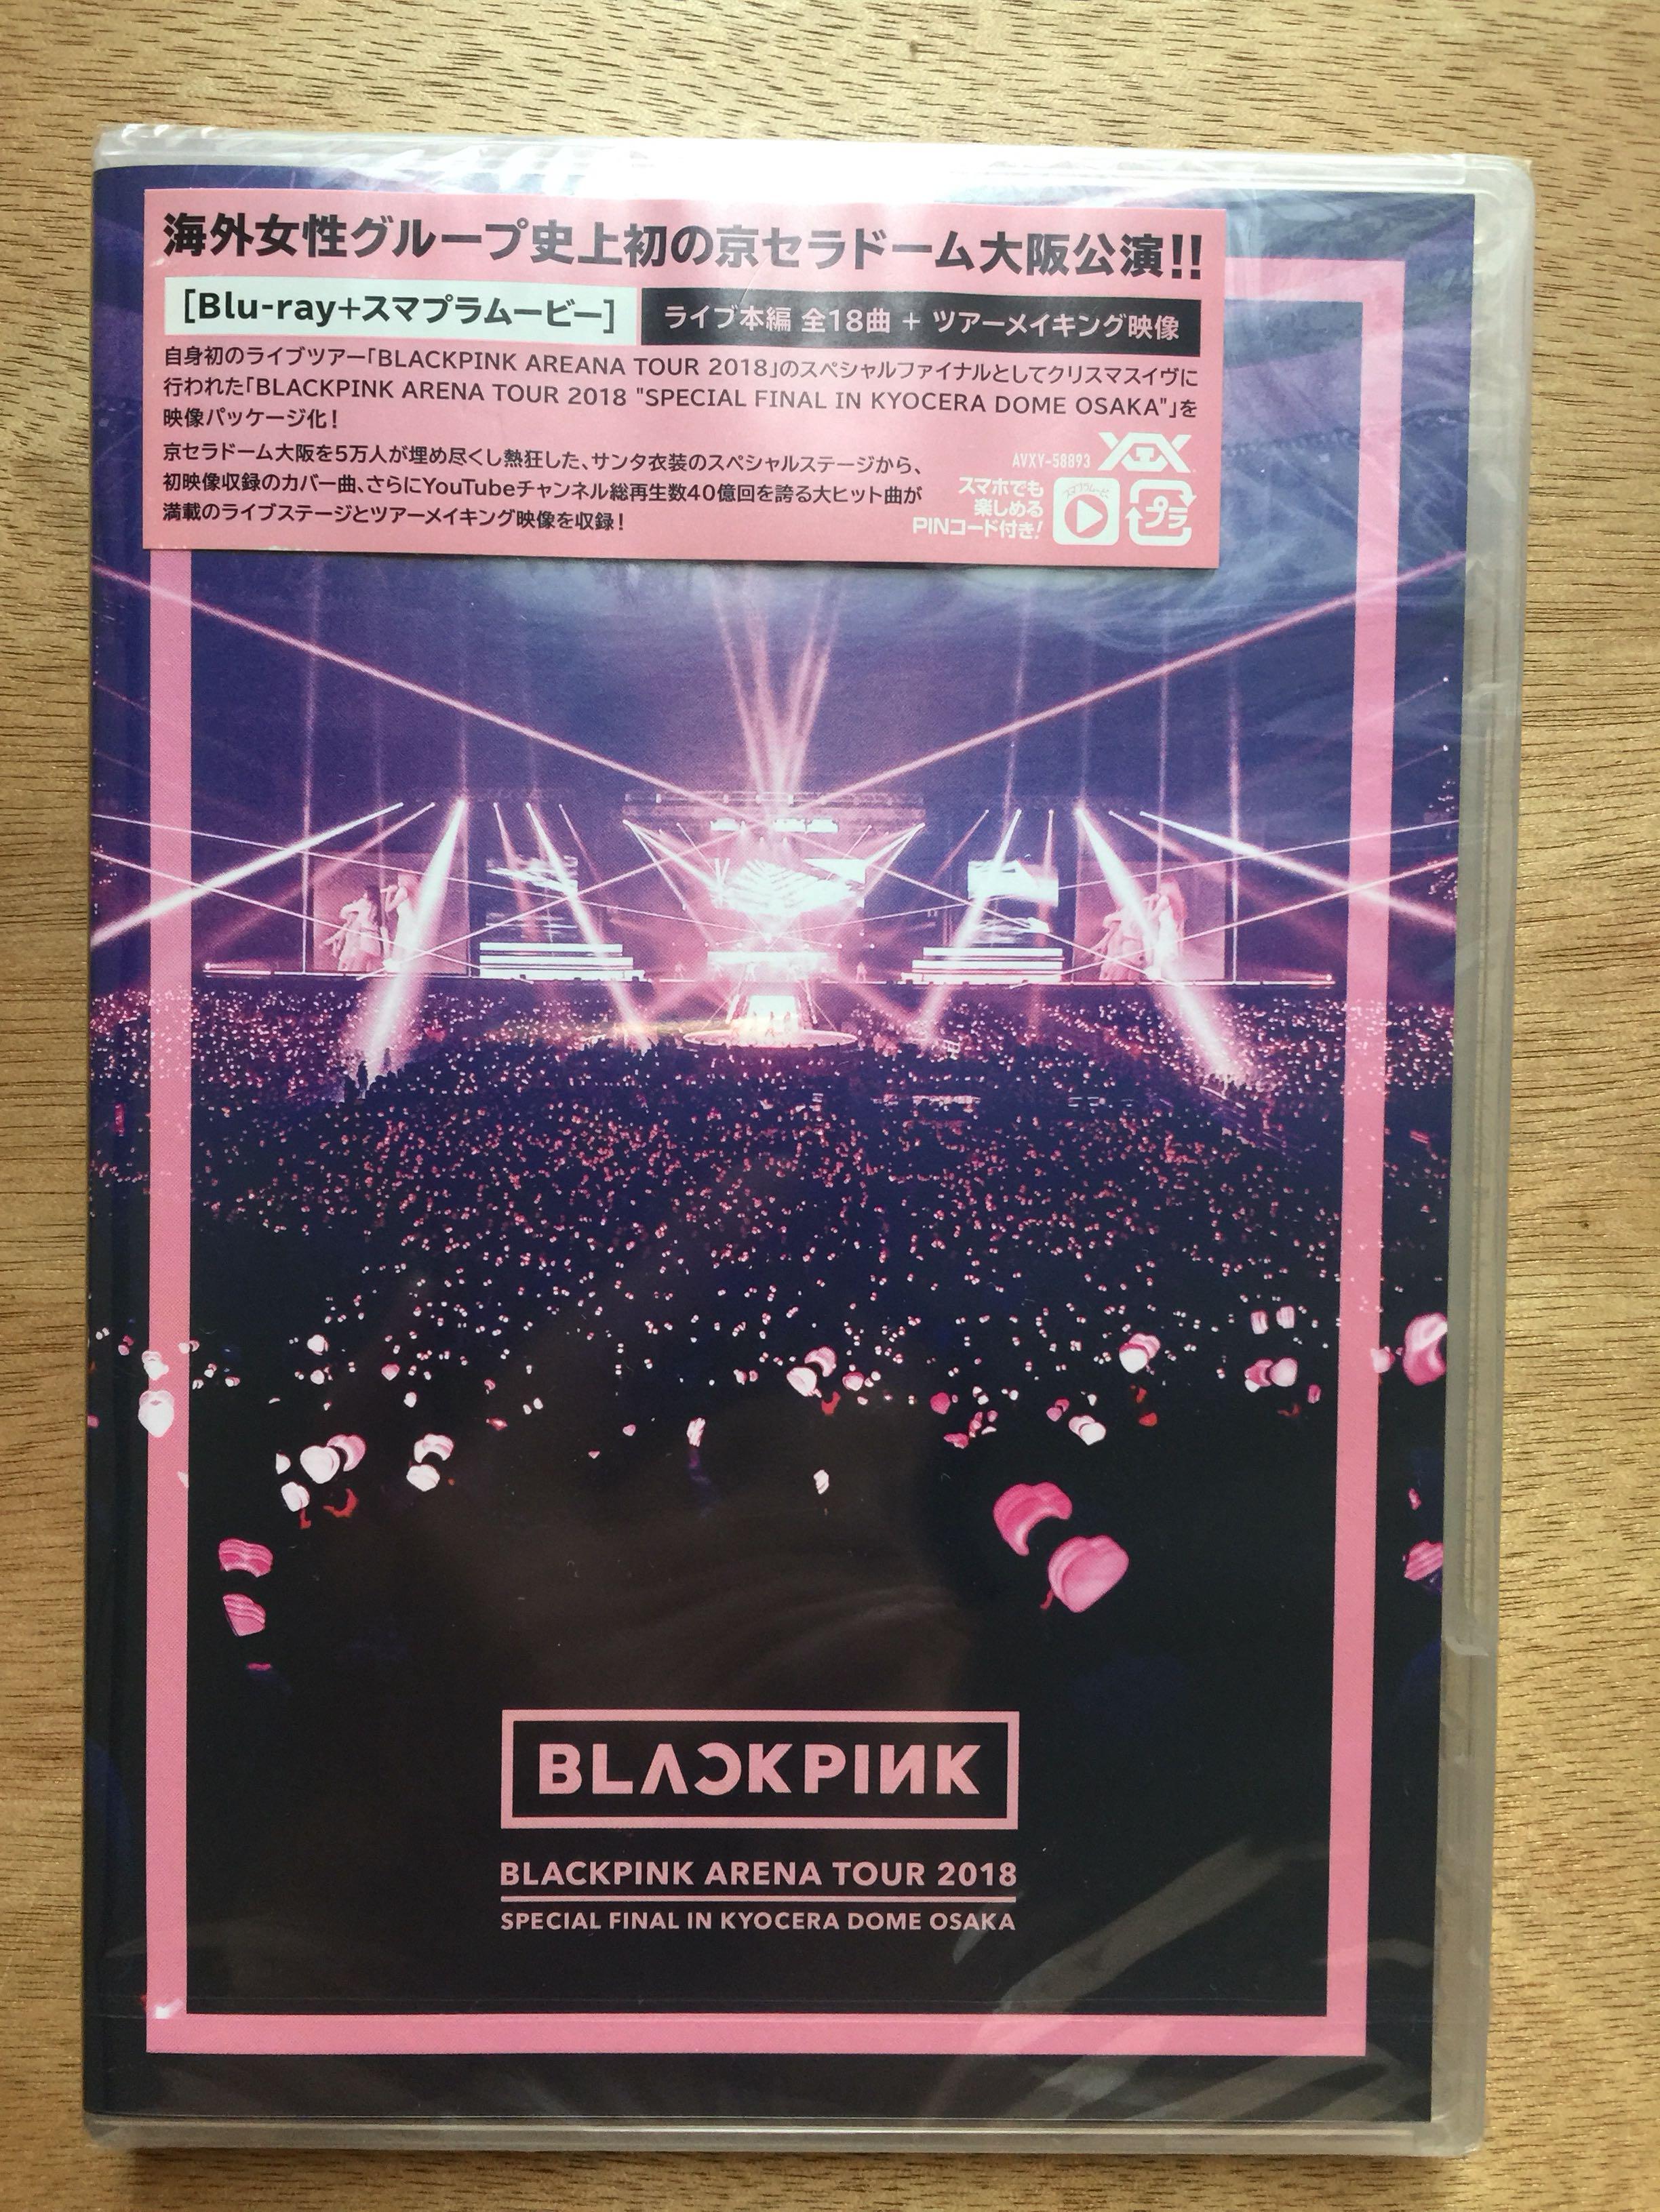 BLACKPINK ARENA TOUR 2018 SPECIAL FINAL IN KYOCERA DOME OSAKA 日本 